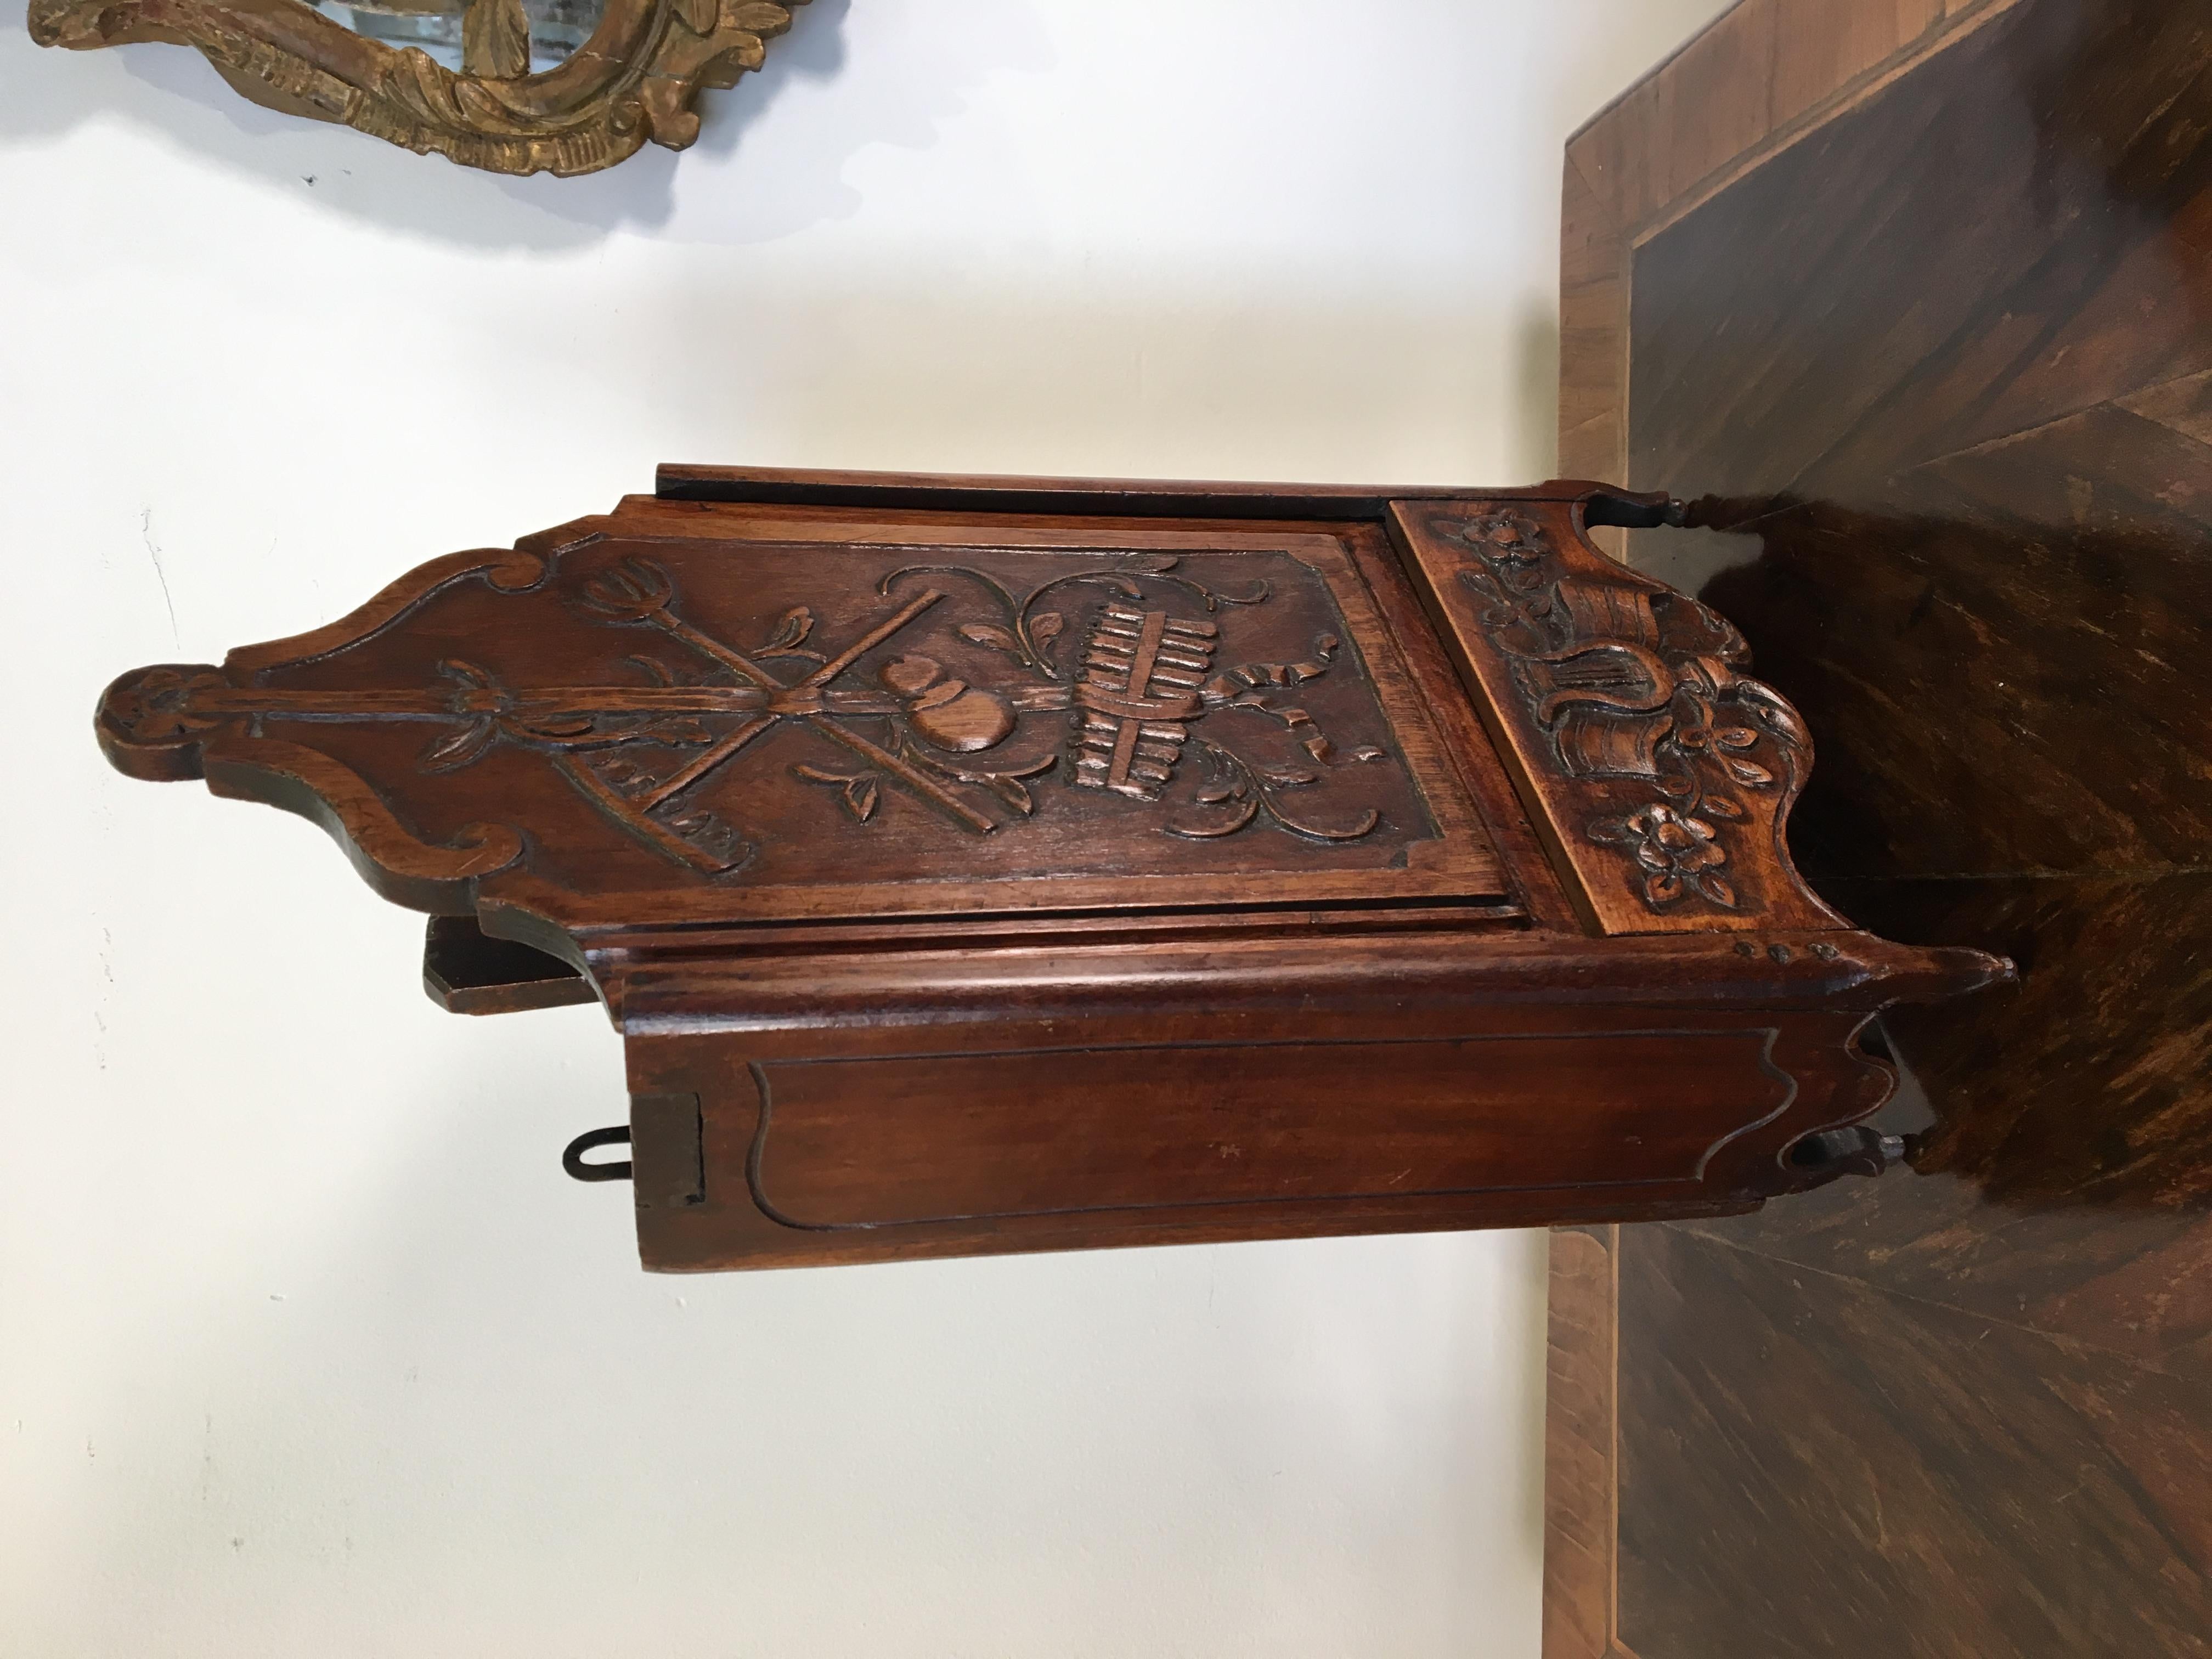 Fine 19th century French Provincial carved walnut fariniere in excellent condition. With ebullient farm and musical motifs, the body and sliding top supported by delicate cabriole legs terminating in balls. This richly carved piece has a beautiful